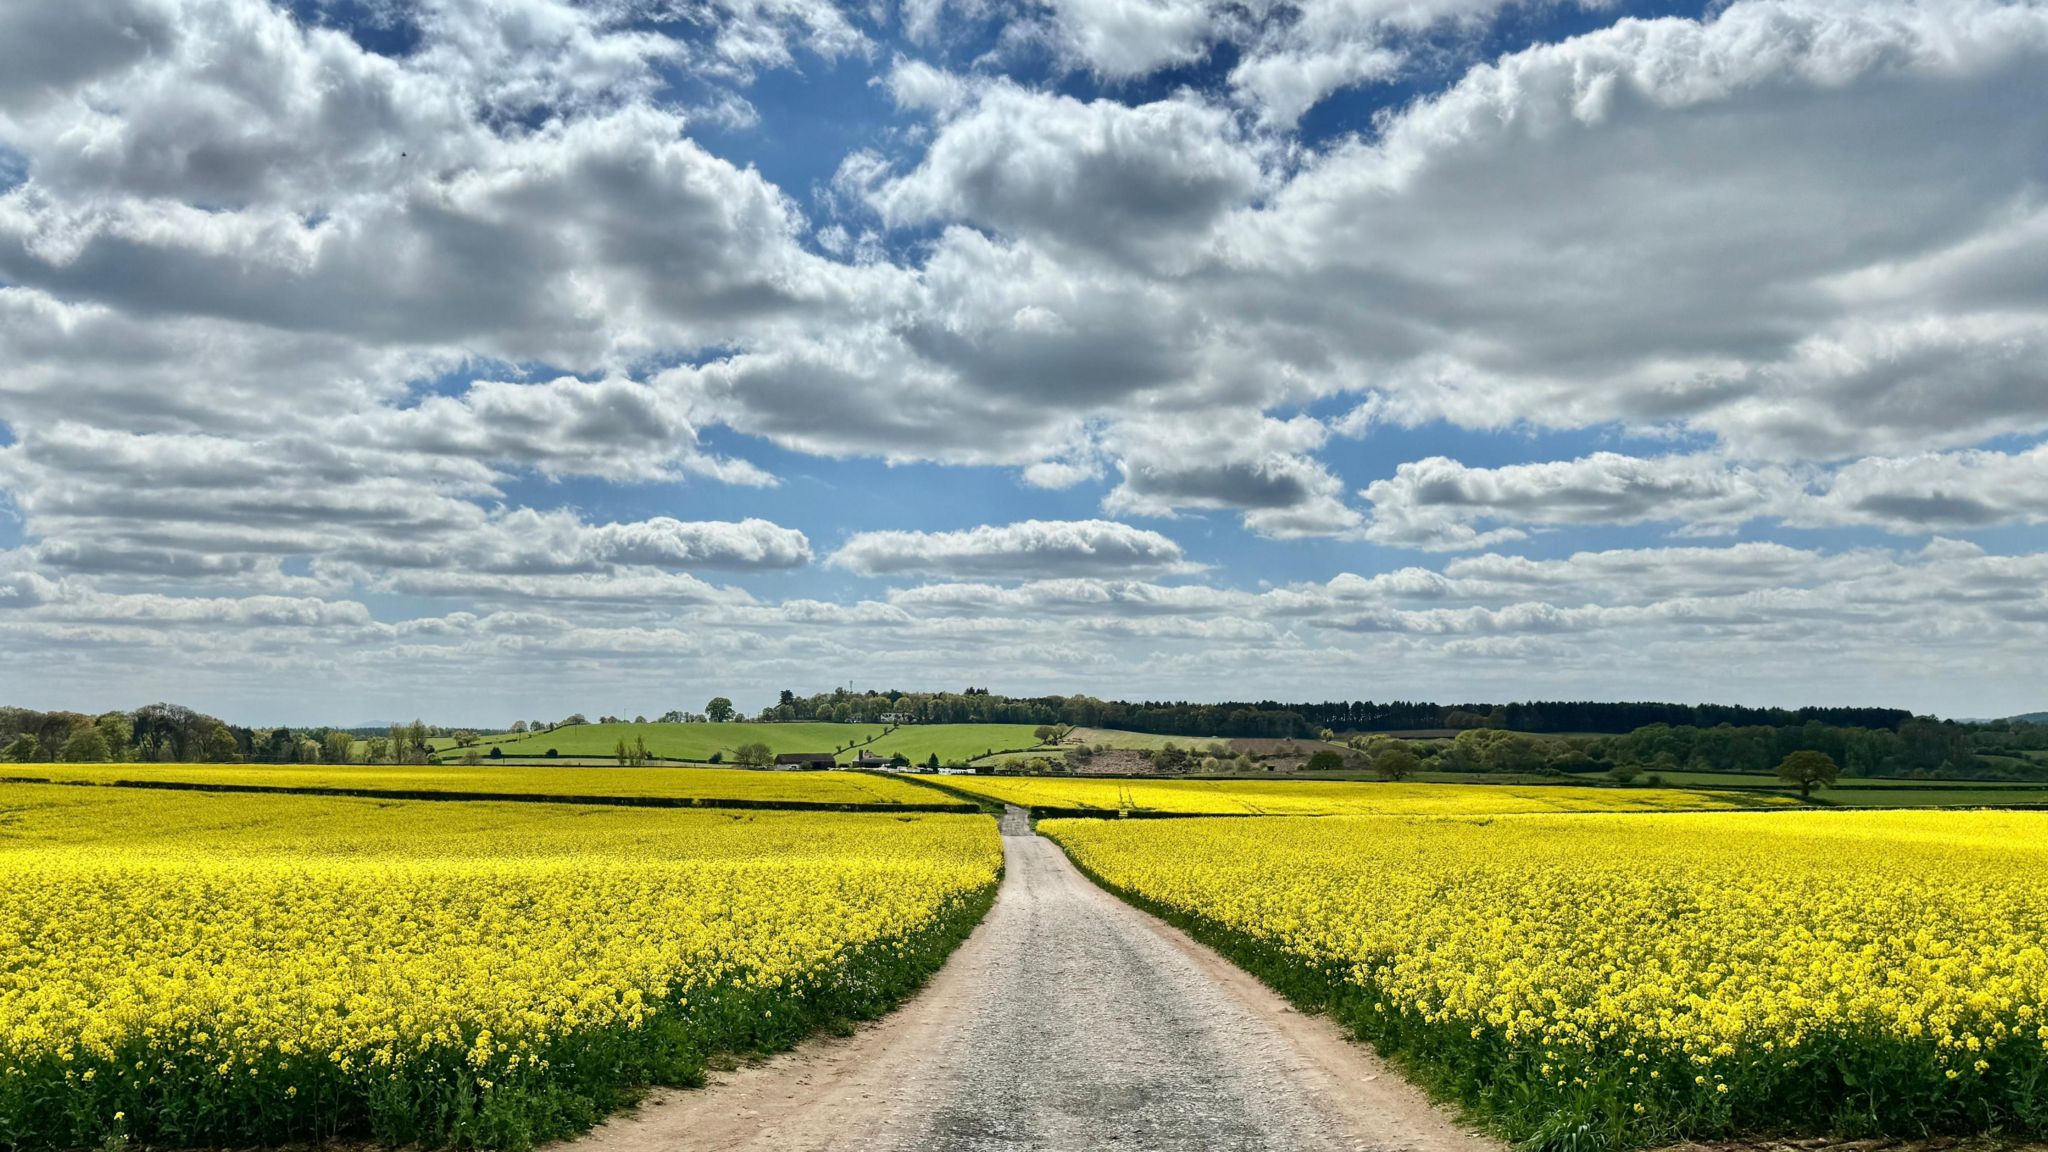 Photograph of a bright field of yellow rape-seed oil with some blue skies and fluffy cumulus clouds